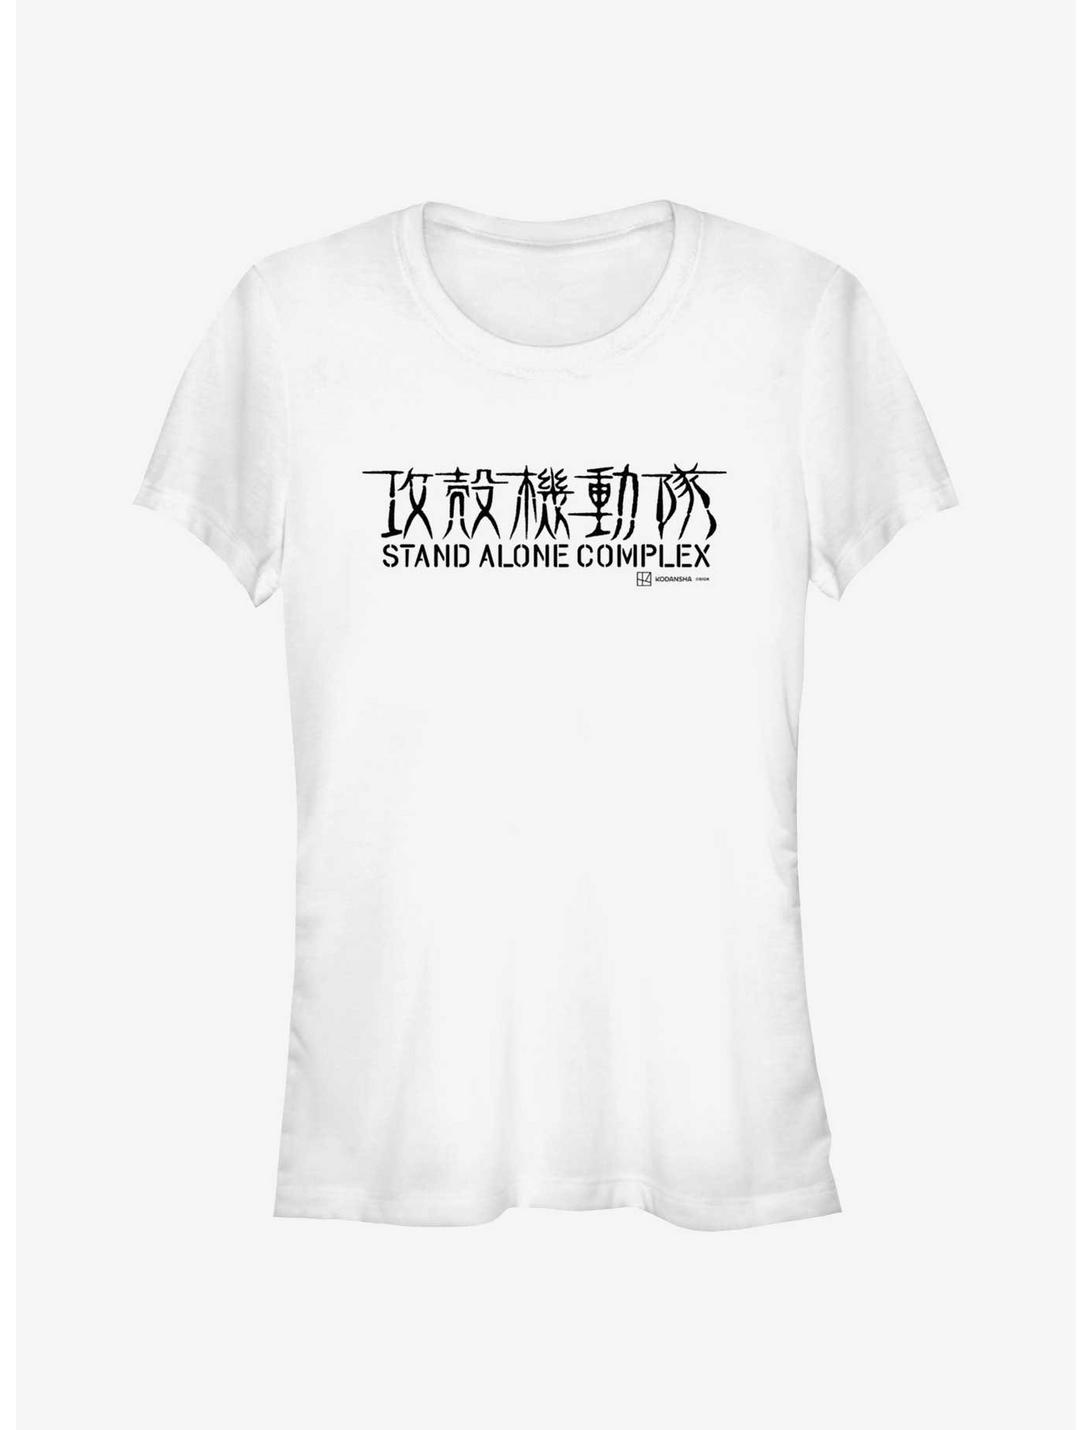 Ghost in the Shell Stand Alone Complex Logo Girls T-Shirt, WHITE, hi-res